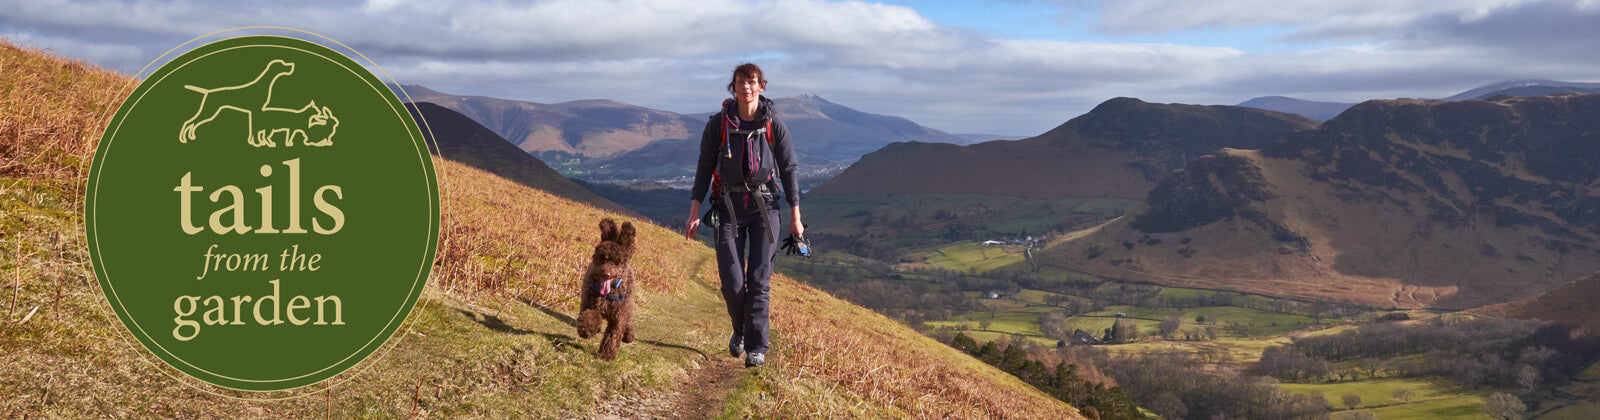 Top 5 Dog Walks With The Best Views